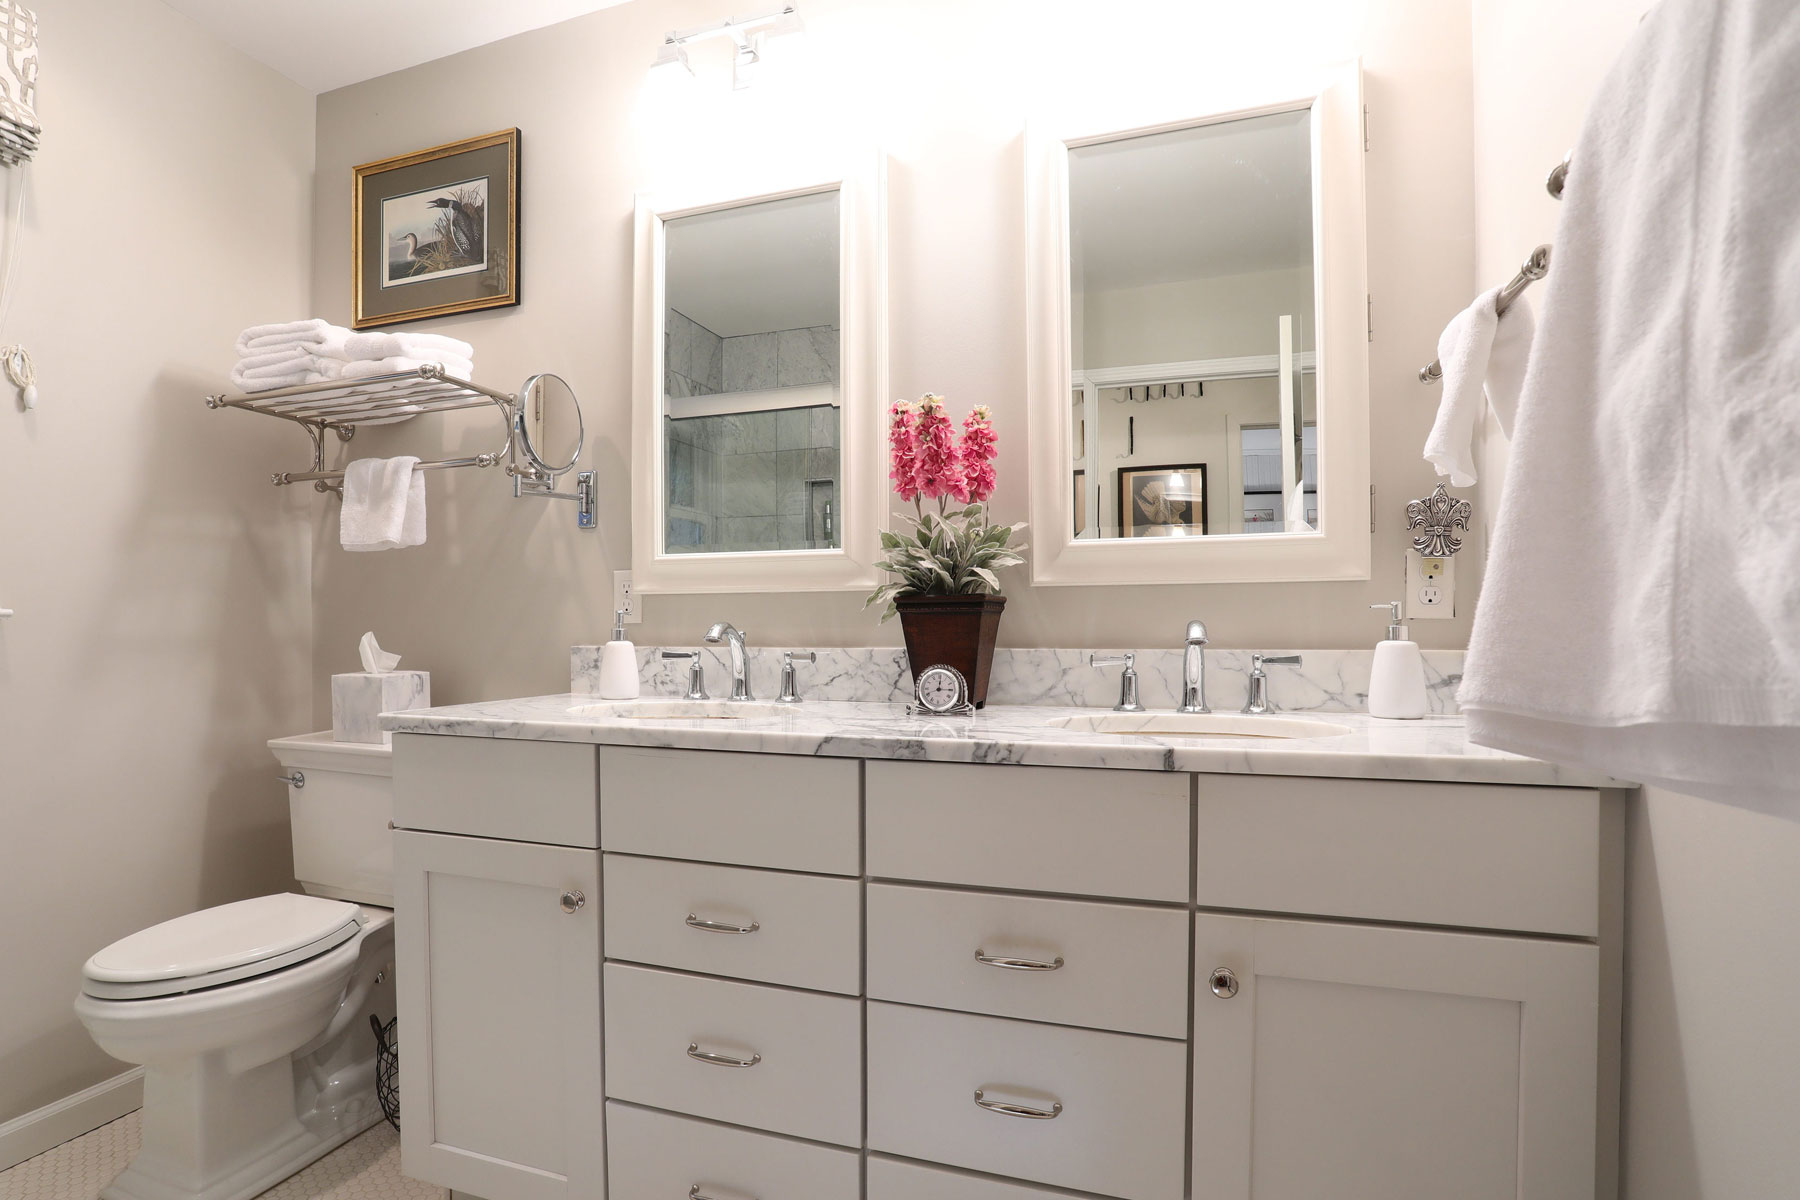 Double vanity with marble countertop